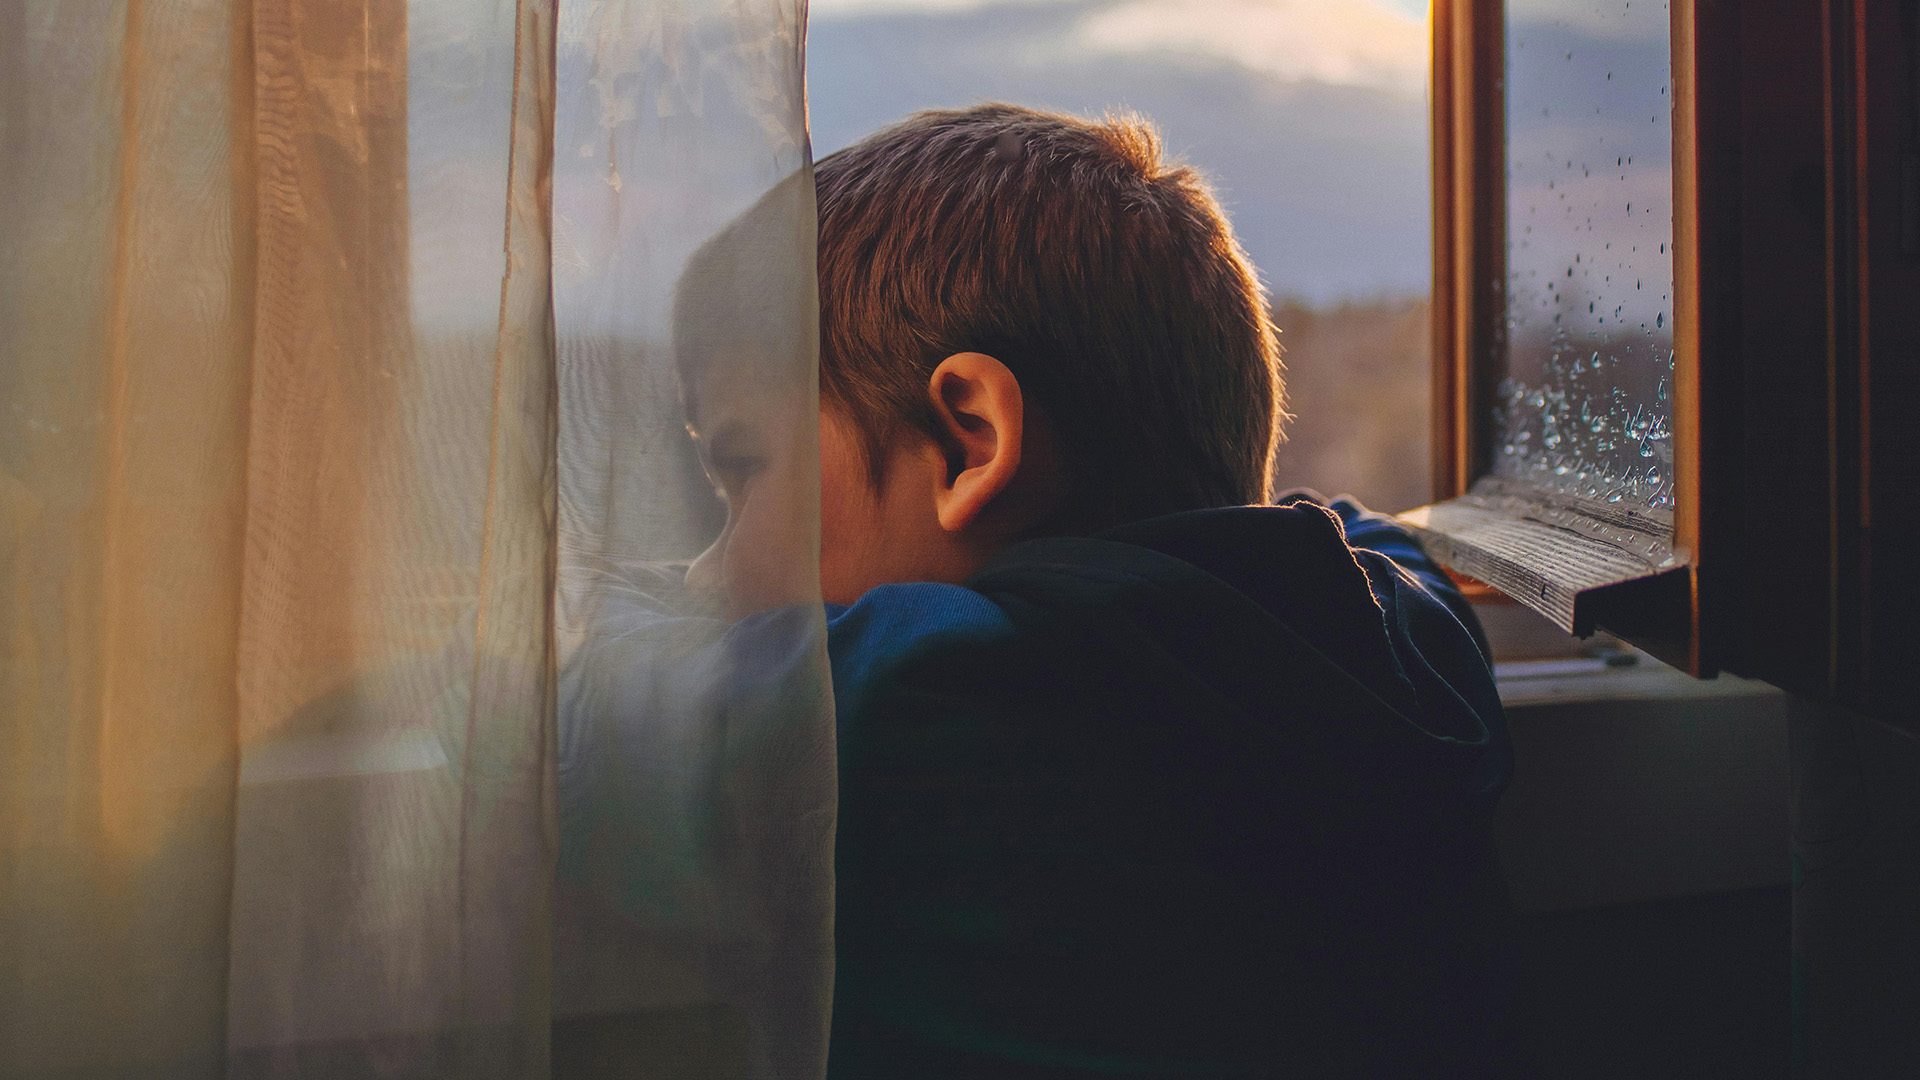 A young boy looking out a window